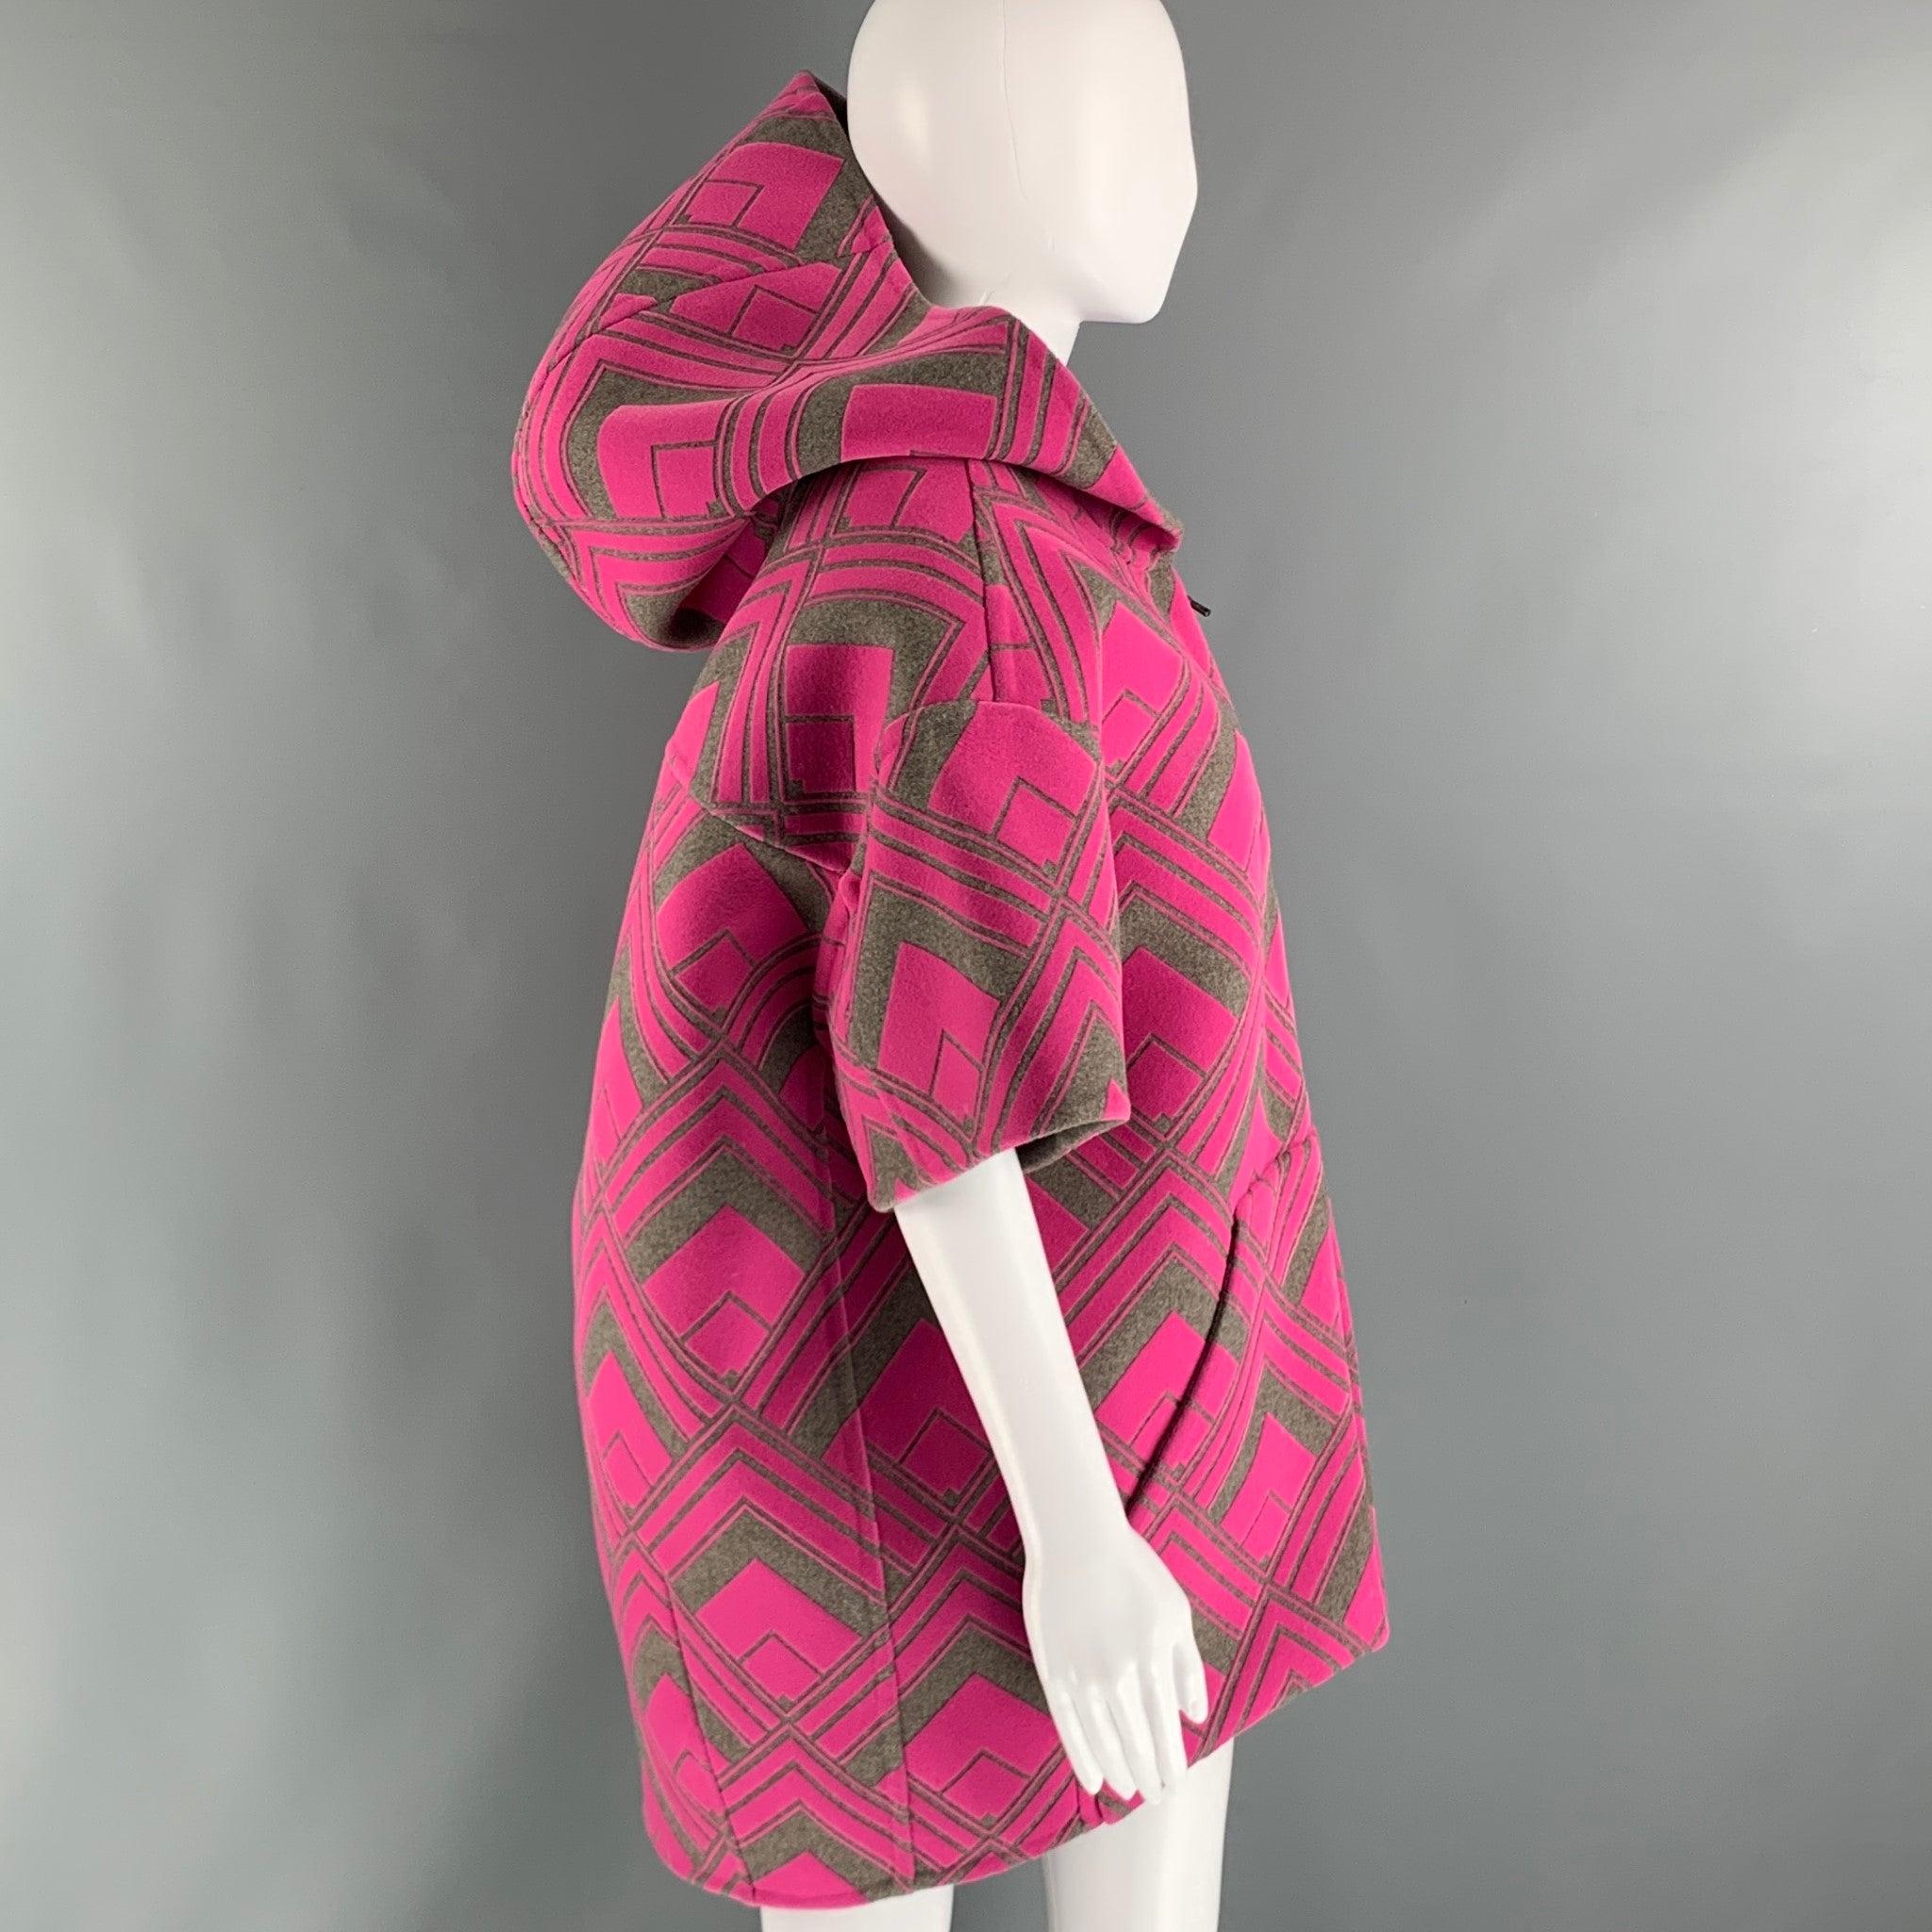 MARC JACOBS RUNWAY 2021 coat comes in a pink and taupe abstract printed wool fleece material featuring a hooded and oversized style, short sleeves, removable quilted vest, and zip up closure. Made in USA.Excellent Pre-Owned Condition. 

Marked:  XS